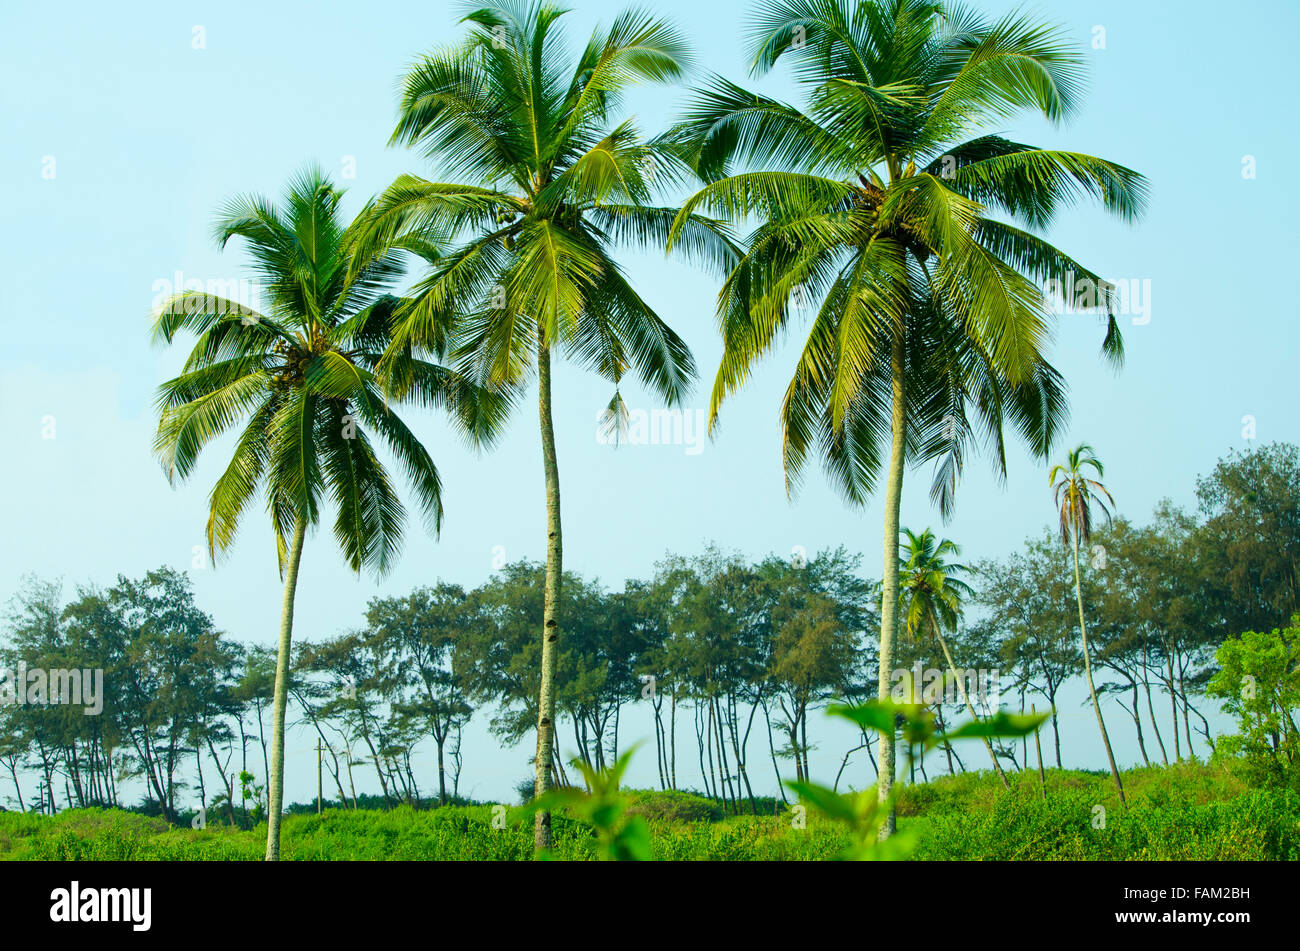 palm tree trees,palm grove against the blue sky,a palm tree,trees,plants of india,asia,a grass,plants,the sky Stock Photo